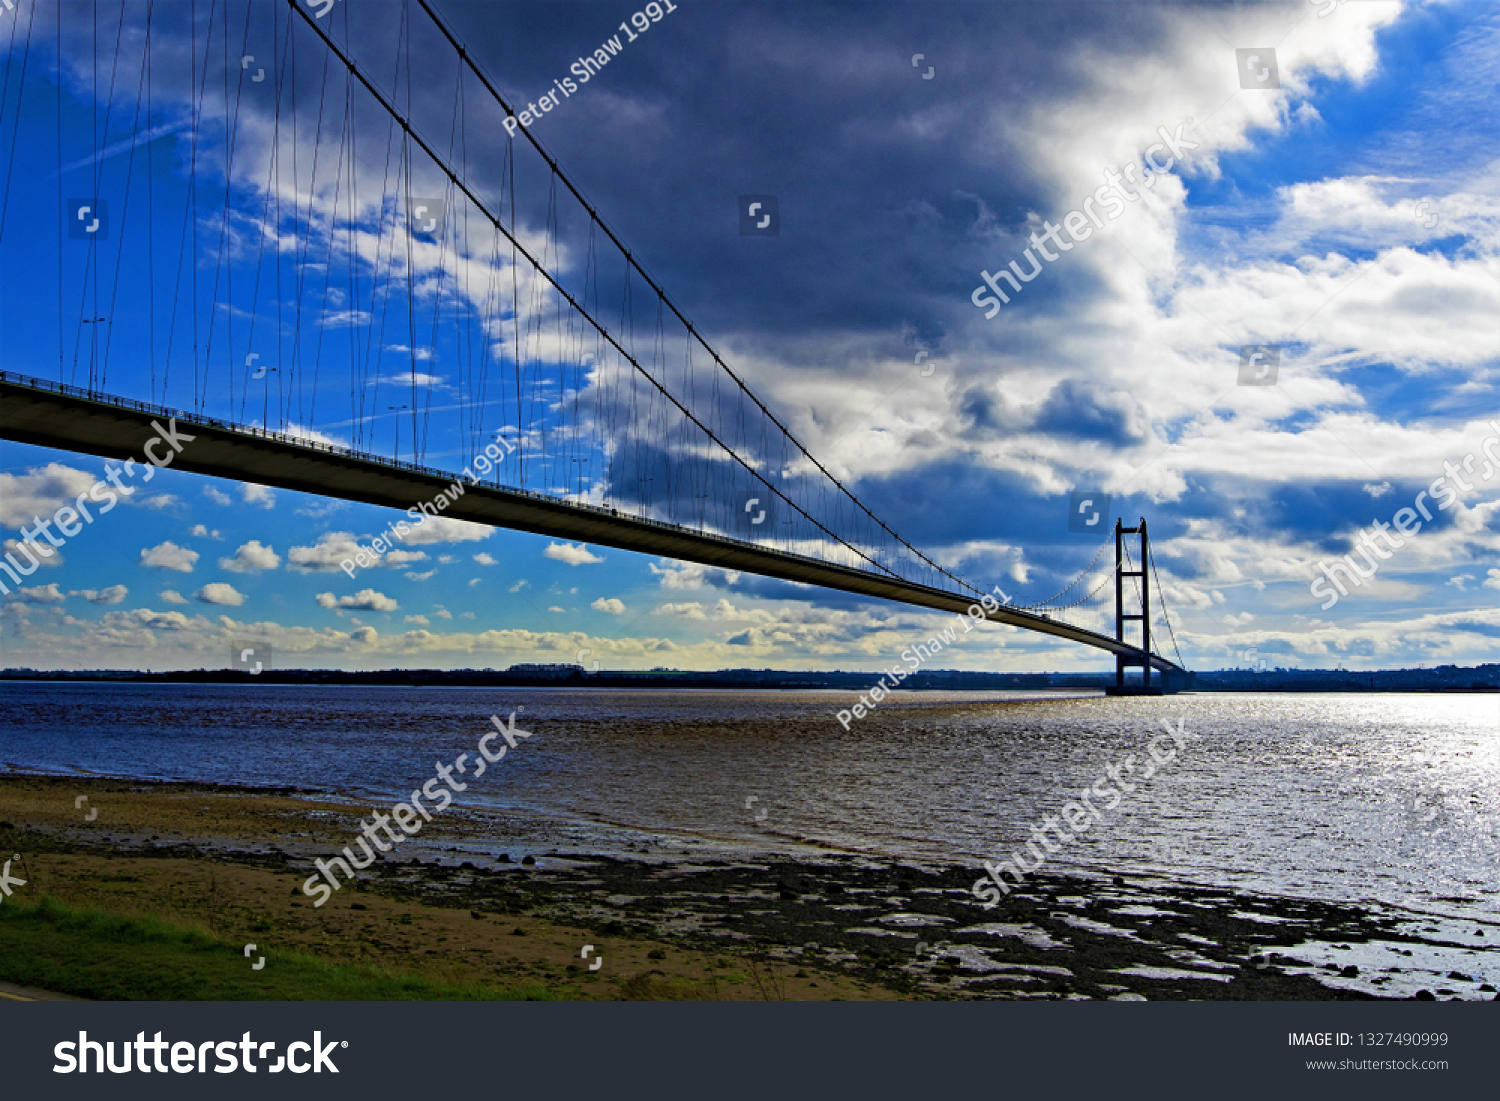 Taken to capture the Humber Bridge and the Humberside Estuary, on a bright sunny day, in March 2019.  #1327490999